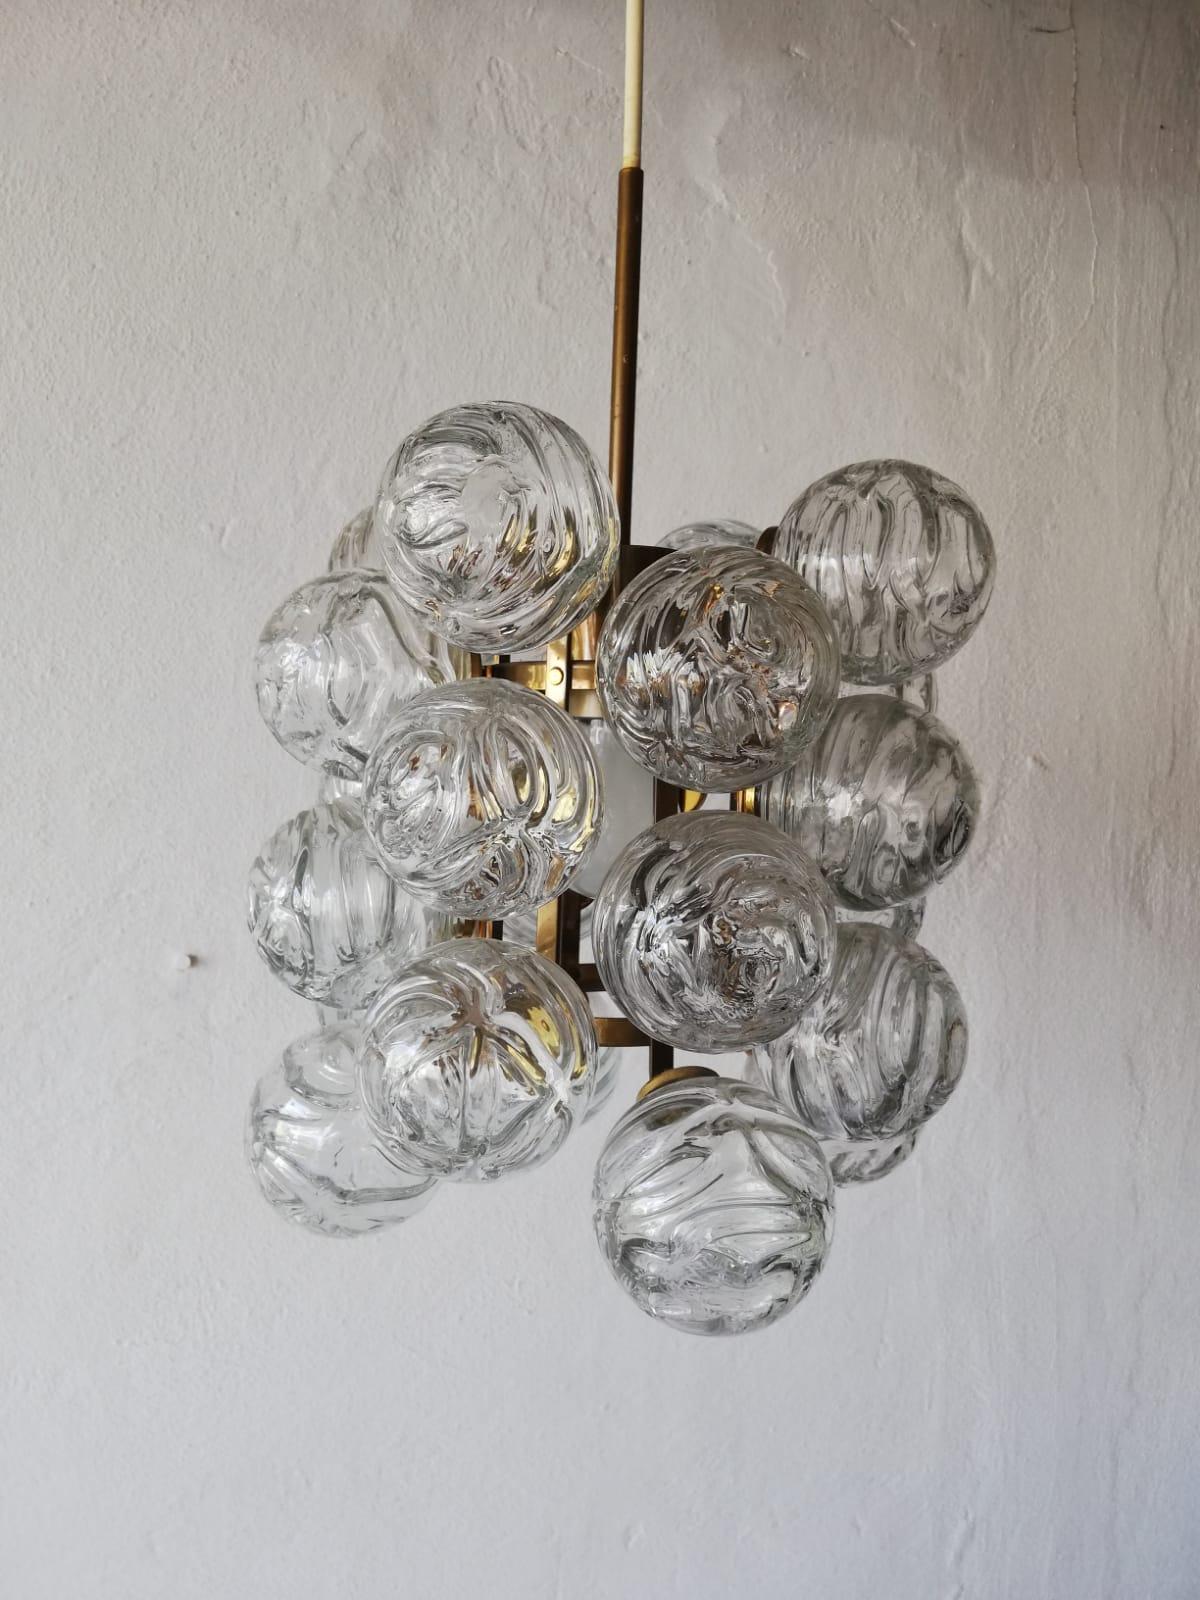 Mid-Century Modern atomic balls & brass pendant lamp by Doria, 1960s Germany

Magnificent design chandelier.

Lampshade is in very good vintage condition.

This lamp works with E27 light bulb.
Wired and suitable to use with 220V and 110V for